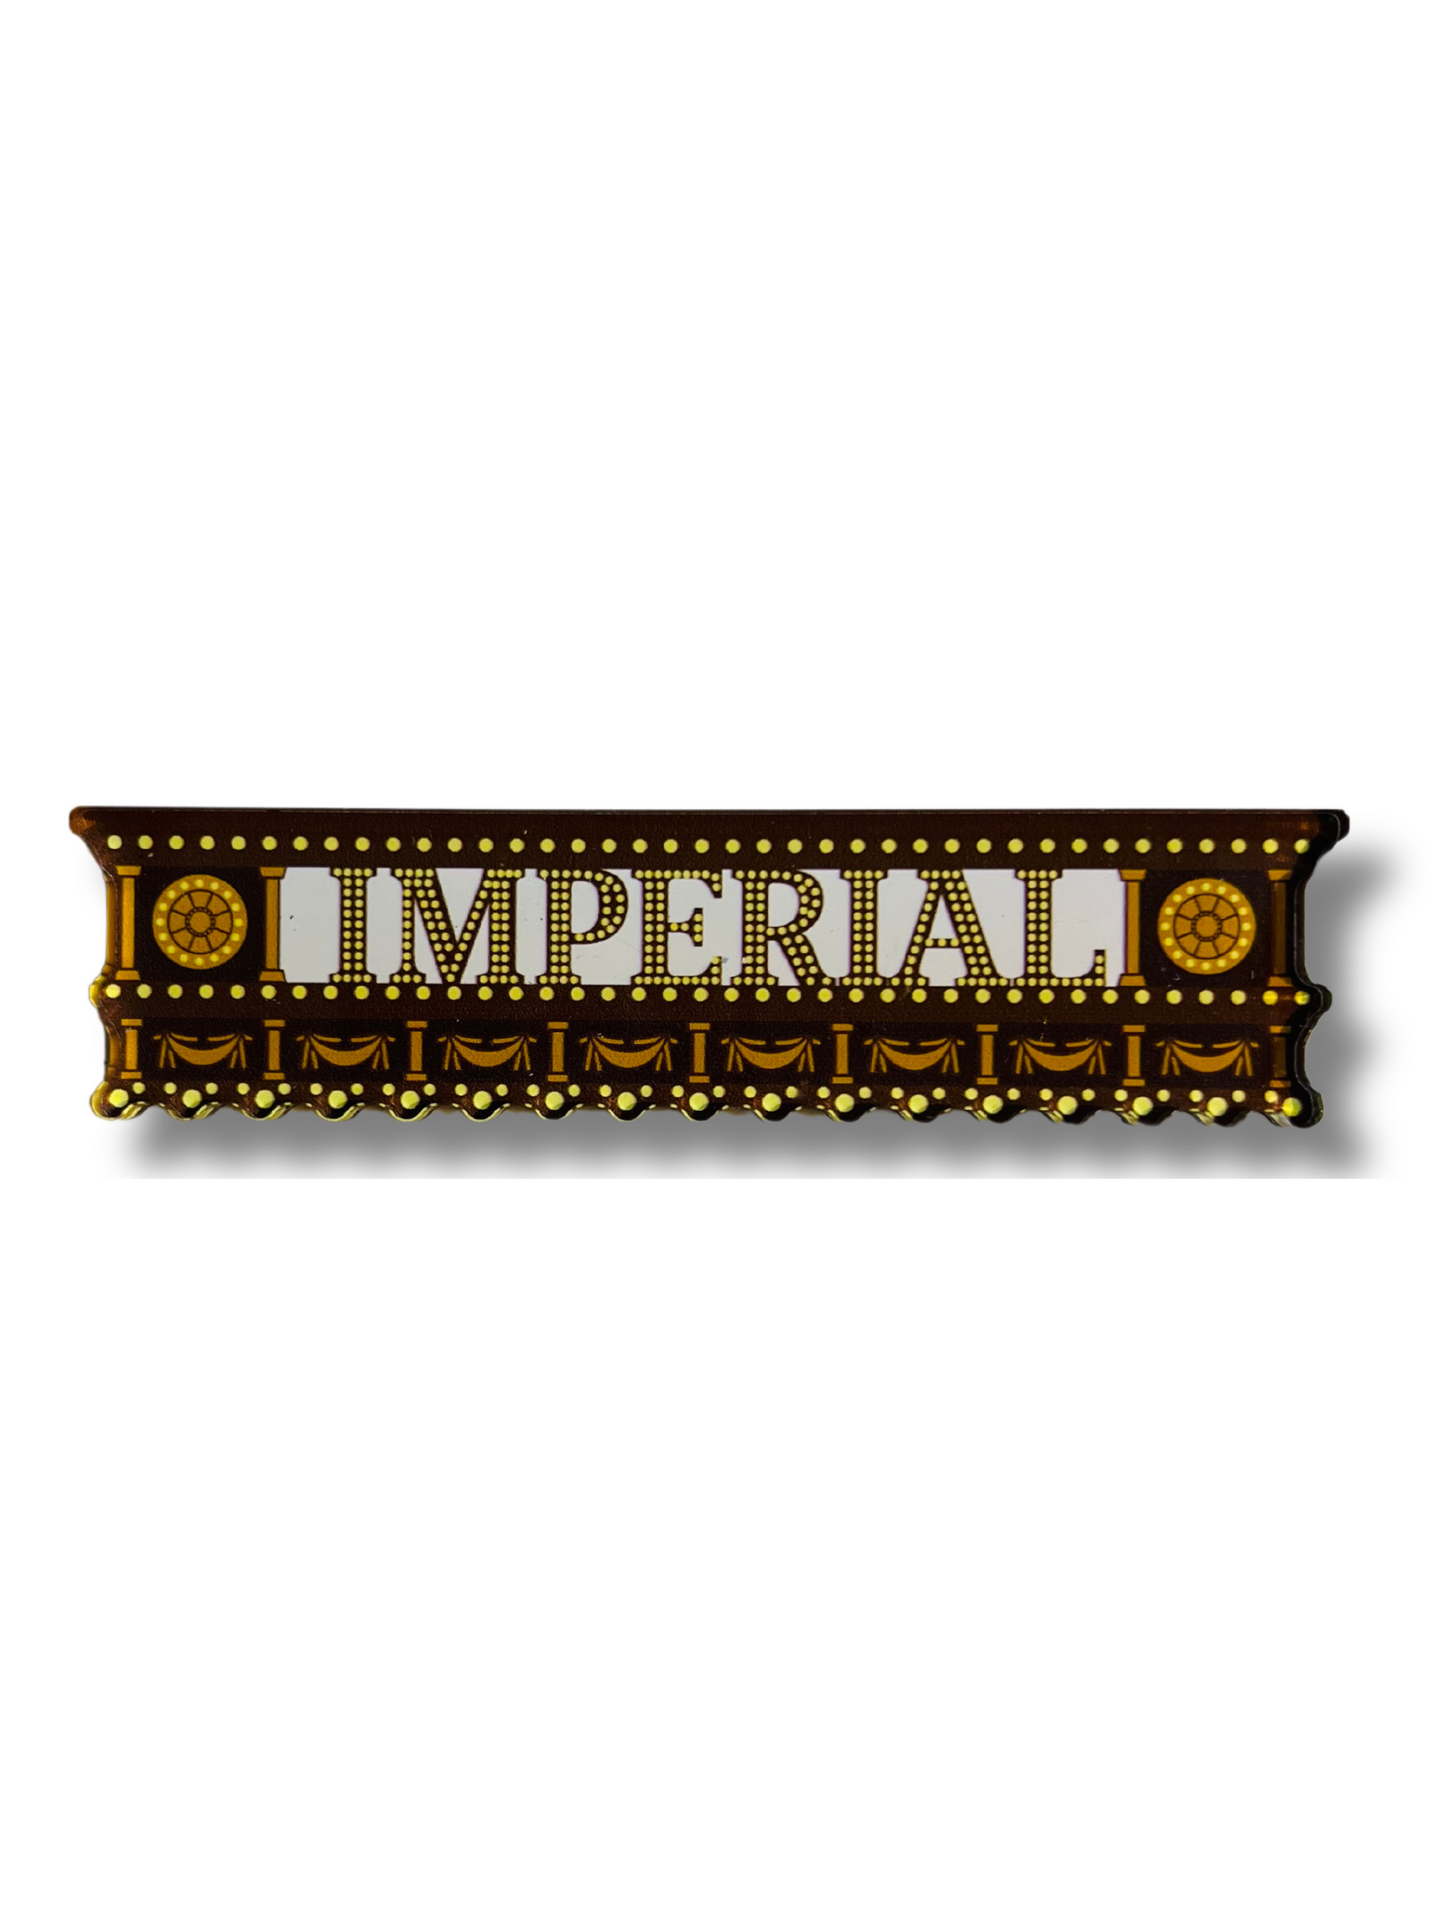 Imperial Marquee Acrylic Magnet